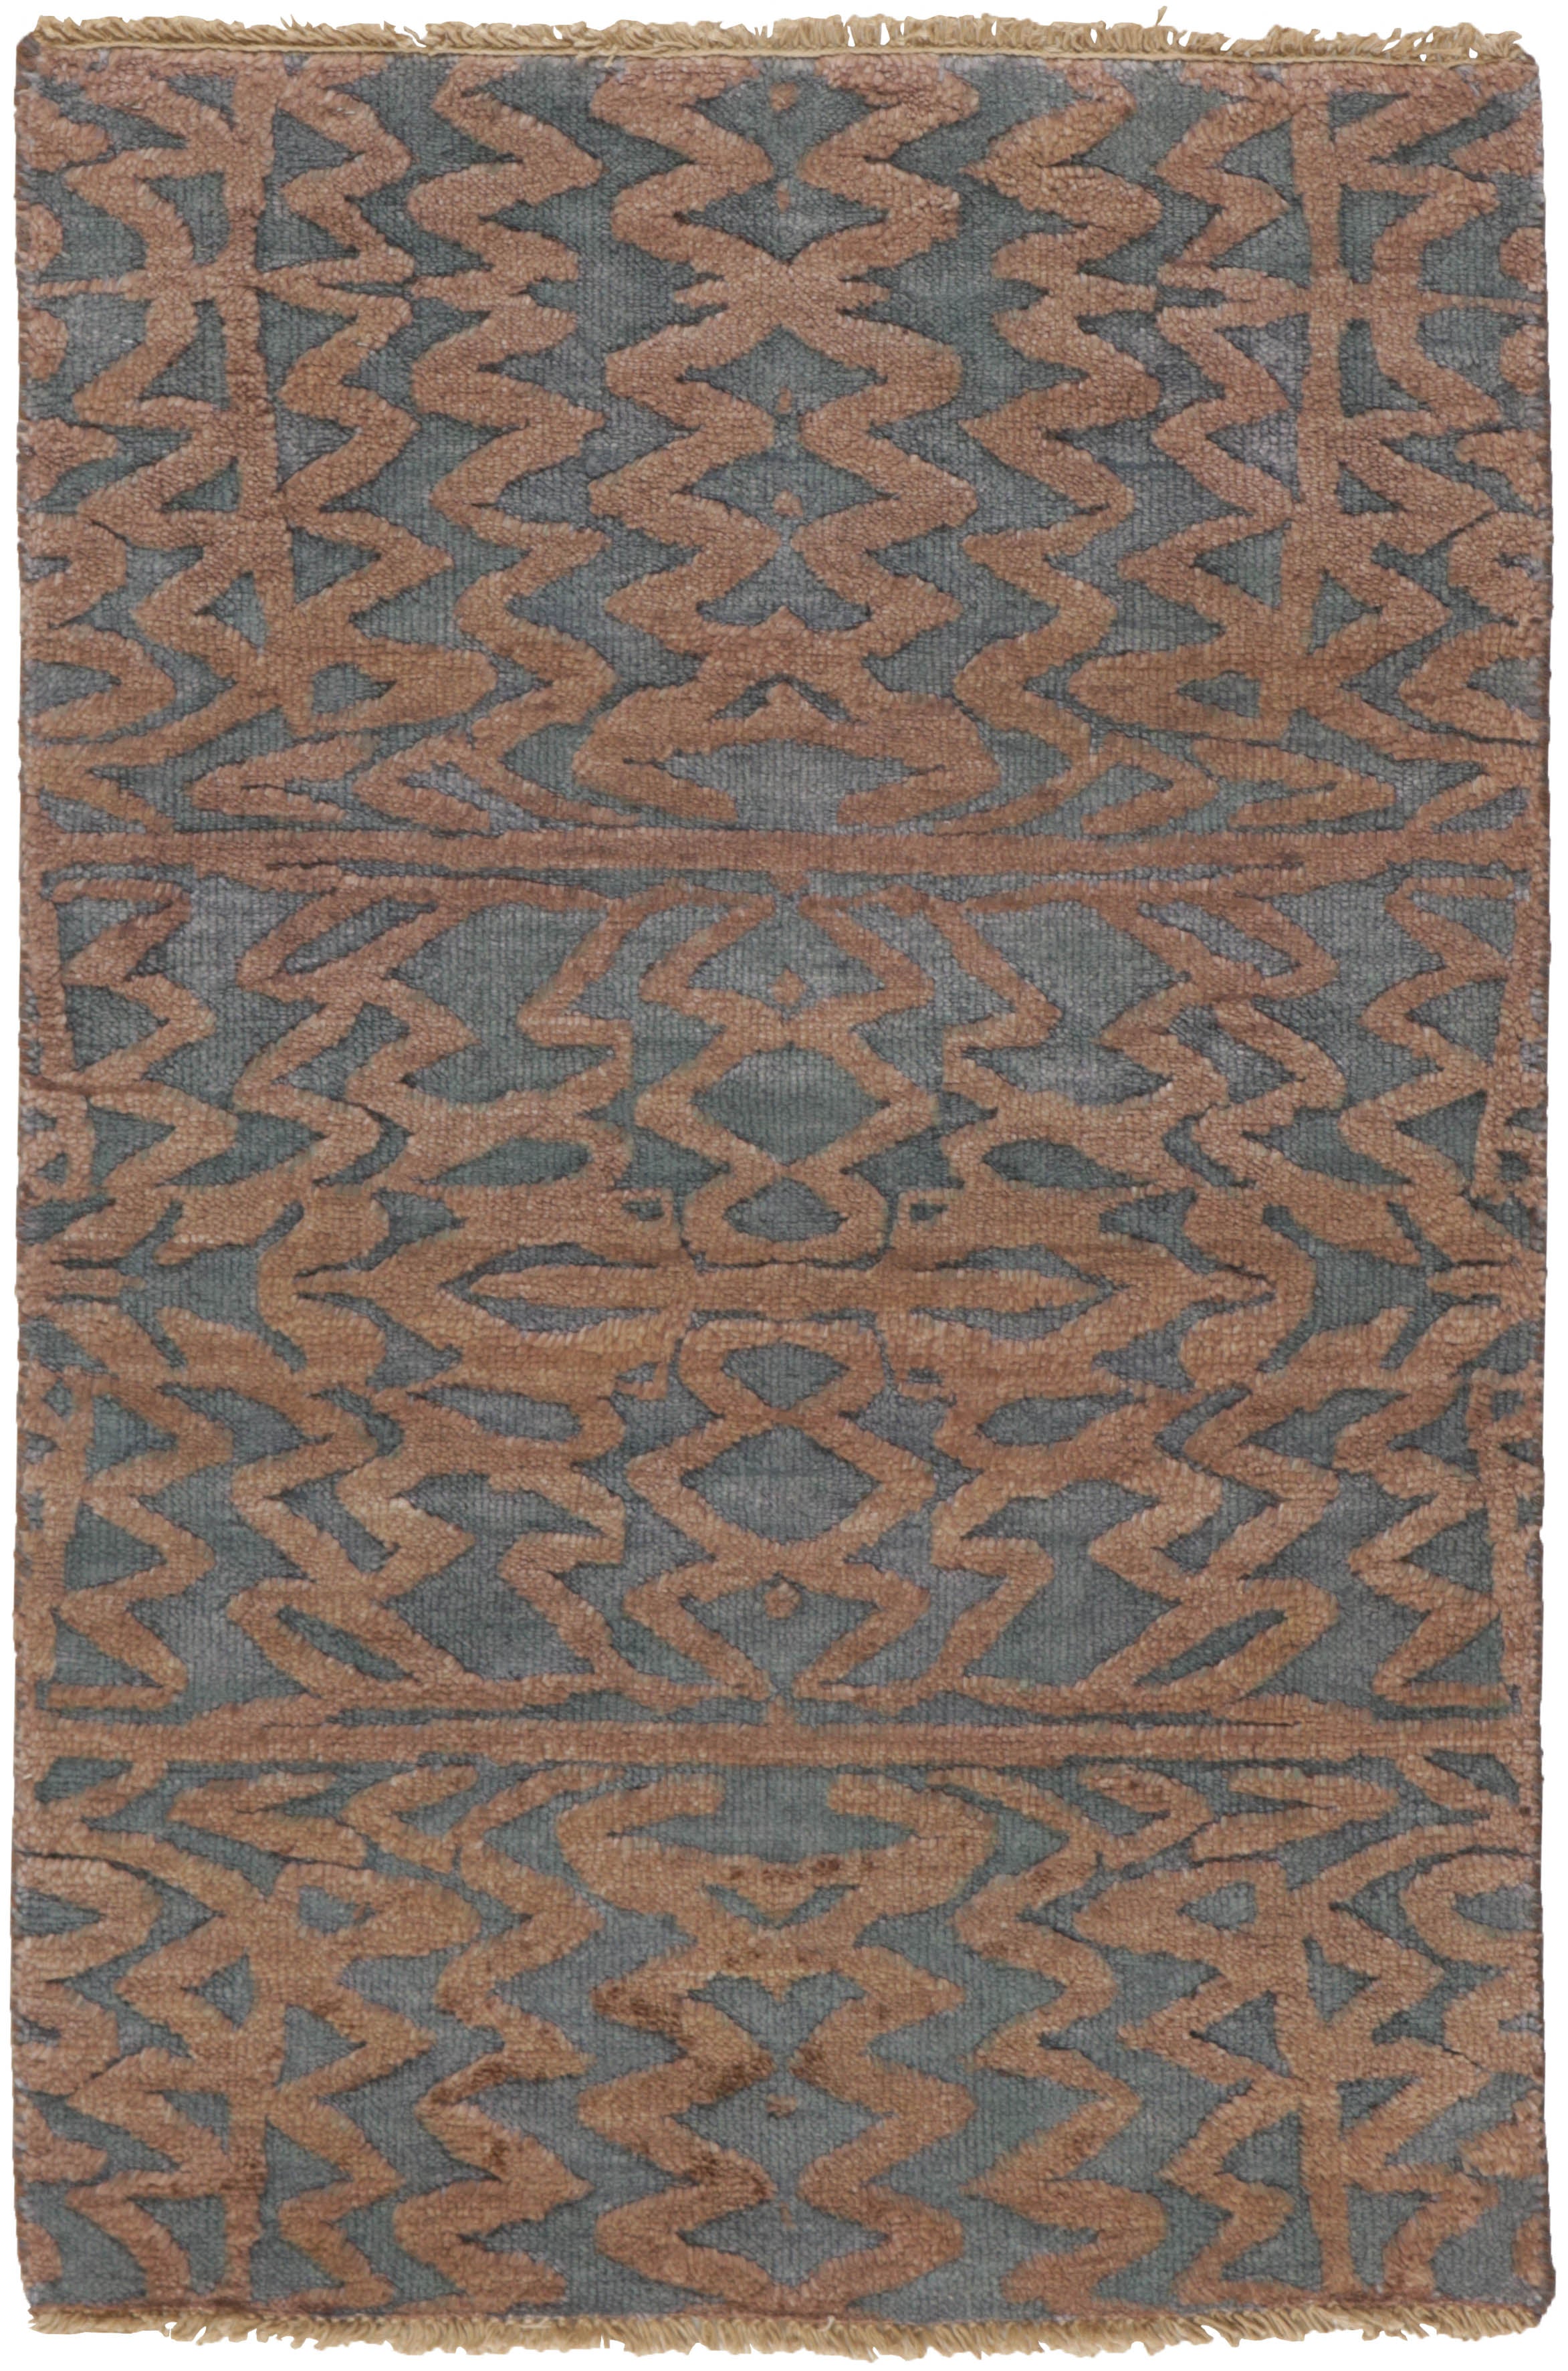 Authentic oriental rug with a damask pattern in grey and beige